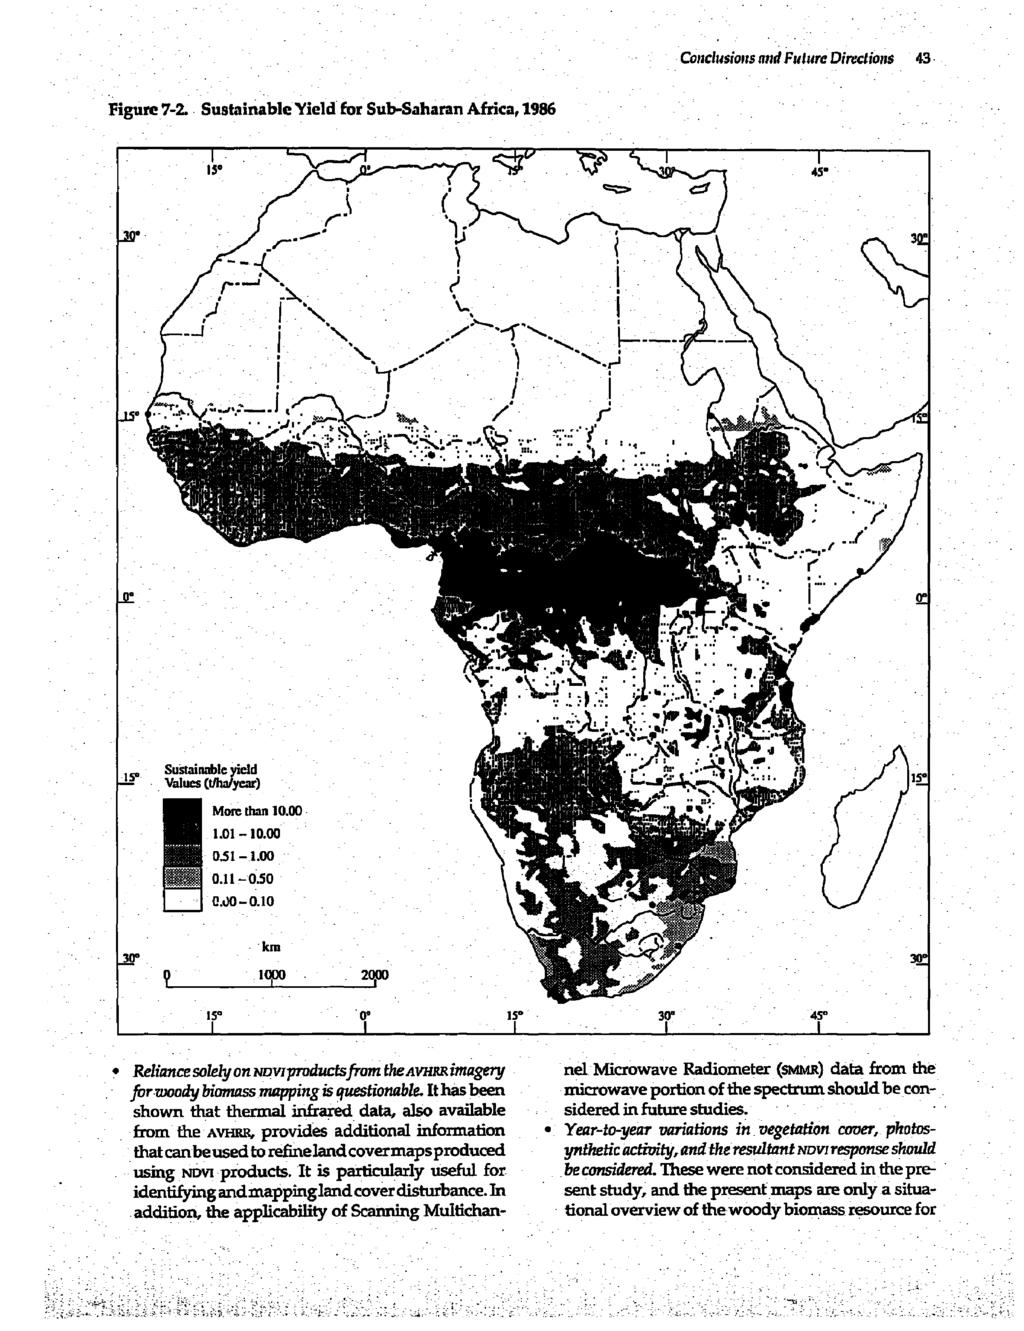 Conclusio and Fulire Directions 43 Figure 7-2. Sustainable Yield for Sub-Saharan Africa, 1986 -'a-~~~~~~~~~~~~~~~~~~~~~~~~5 -~ ~~~ / r S.,~~.J.0 I -'''1'-'p 7' --. <:' * ~~ -...,~~~* I a.